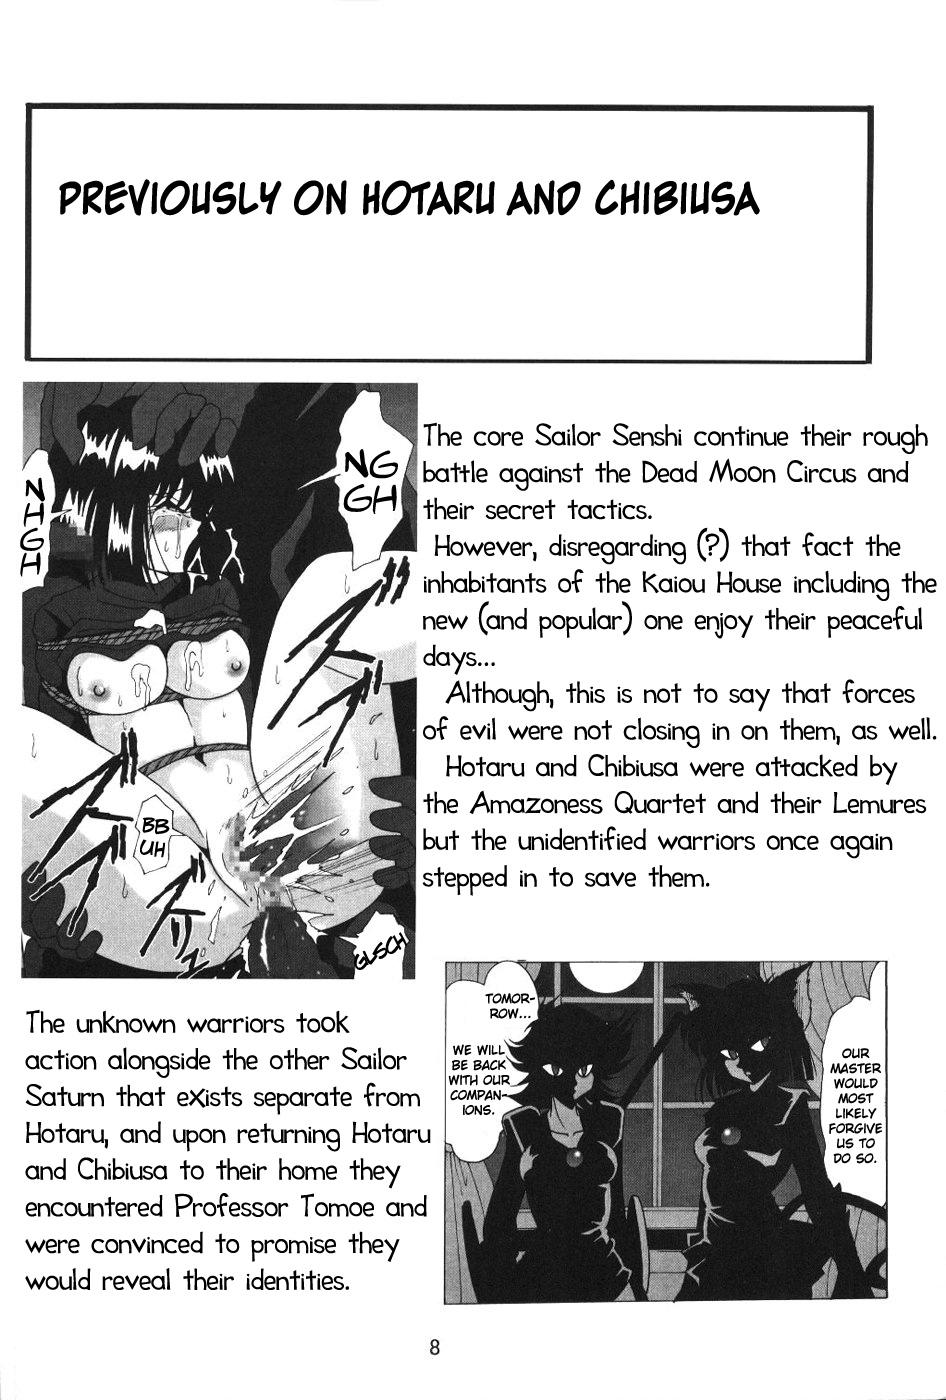 Family Roleplay Silent Saturn SS vol. 7 - Sailor moon Culote - Page 8